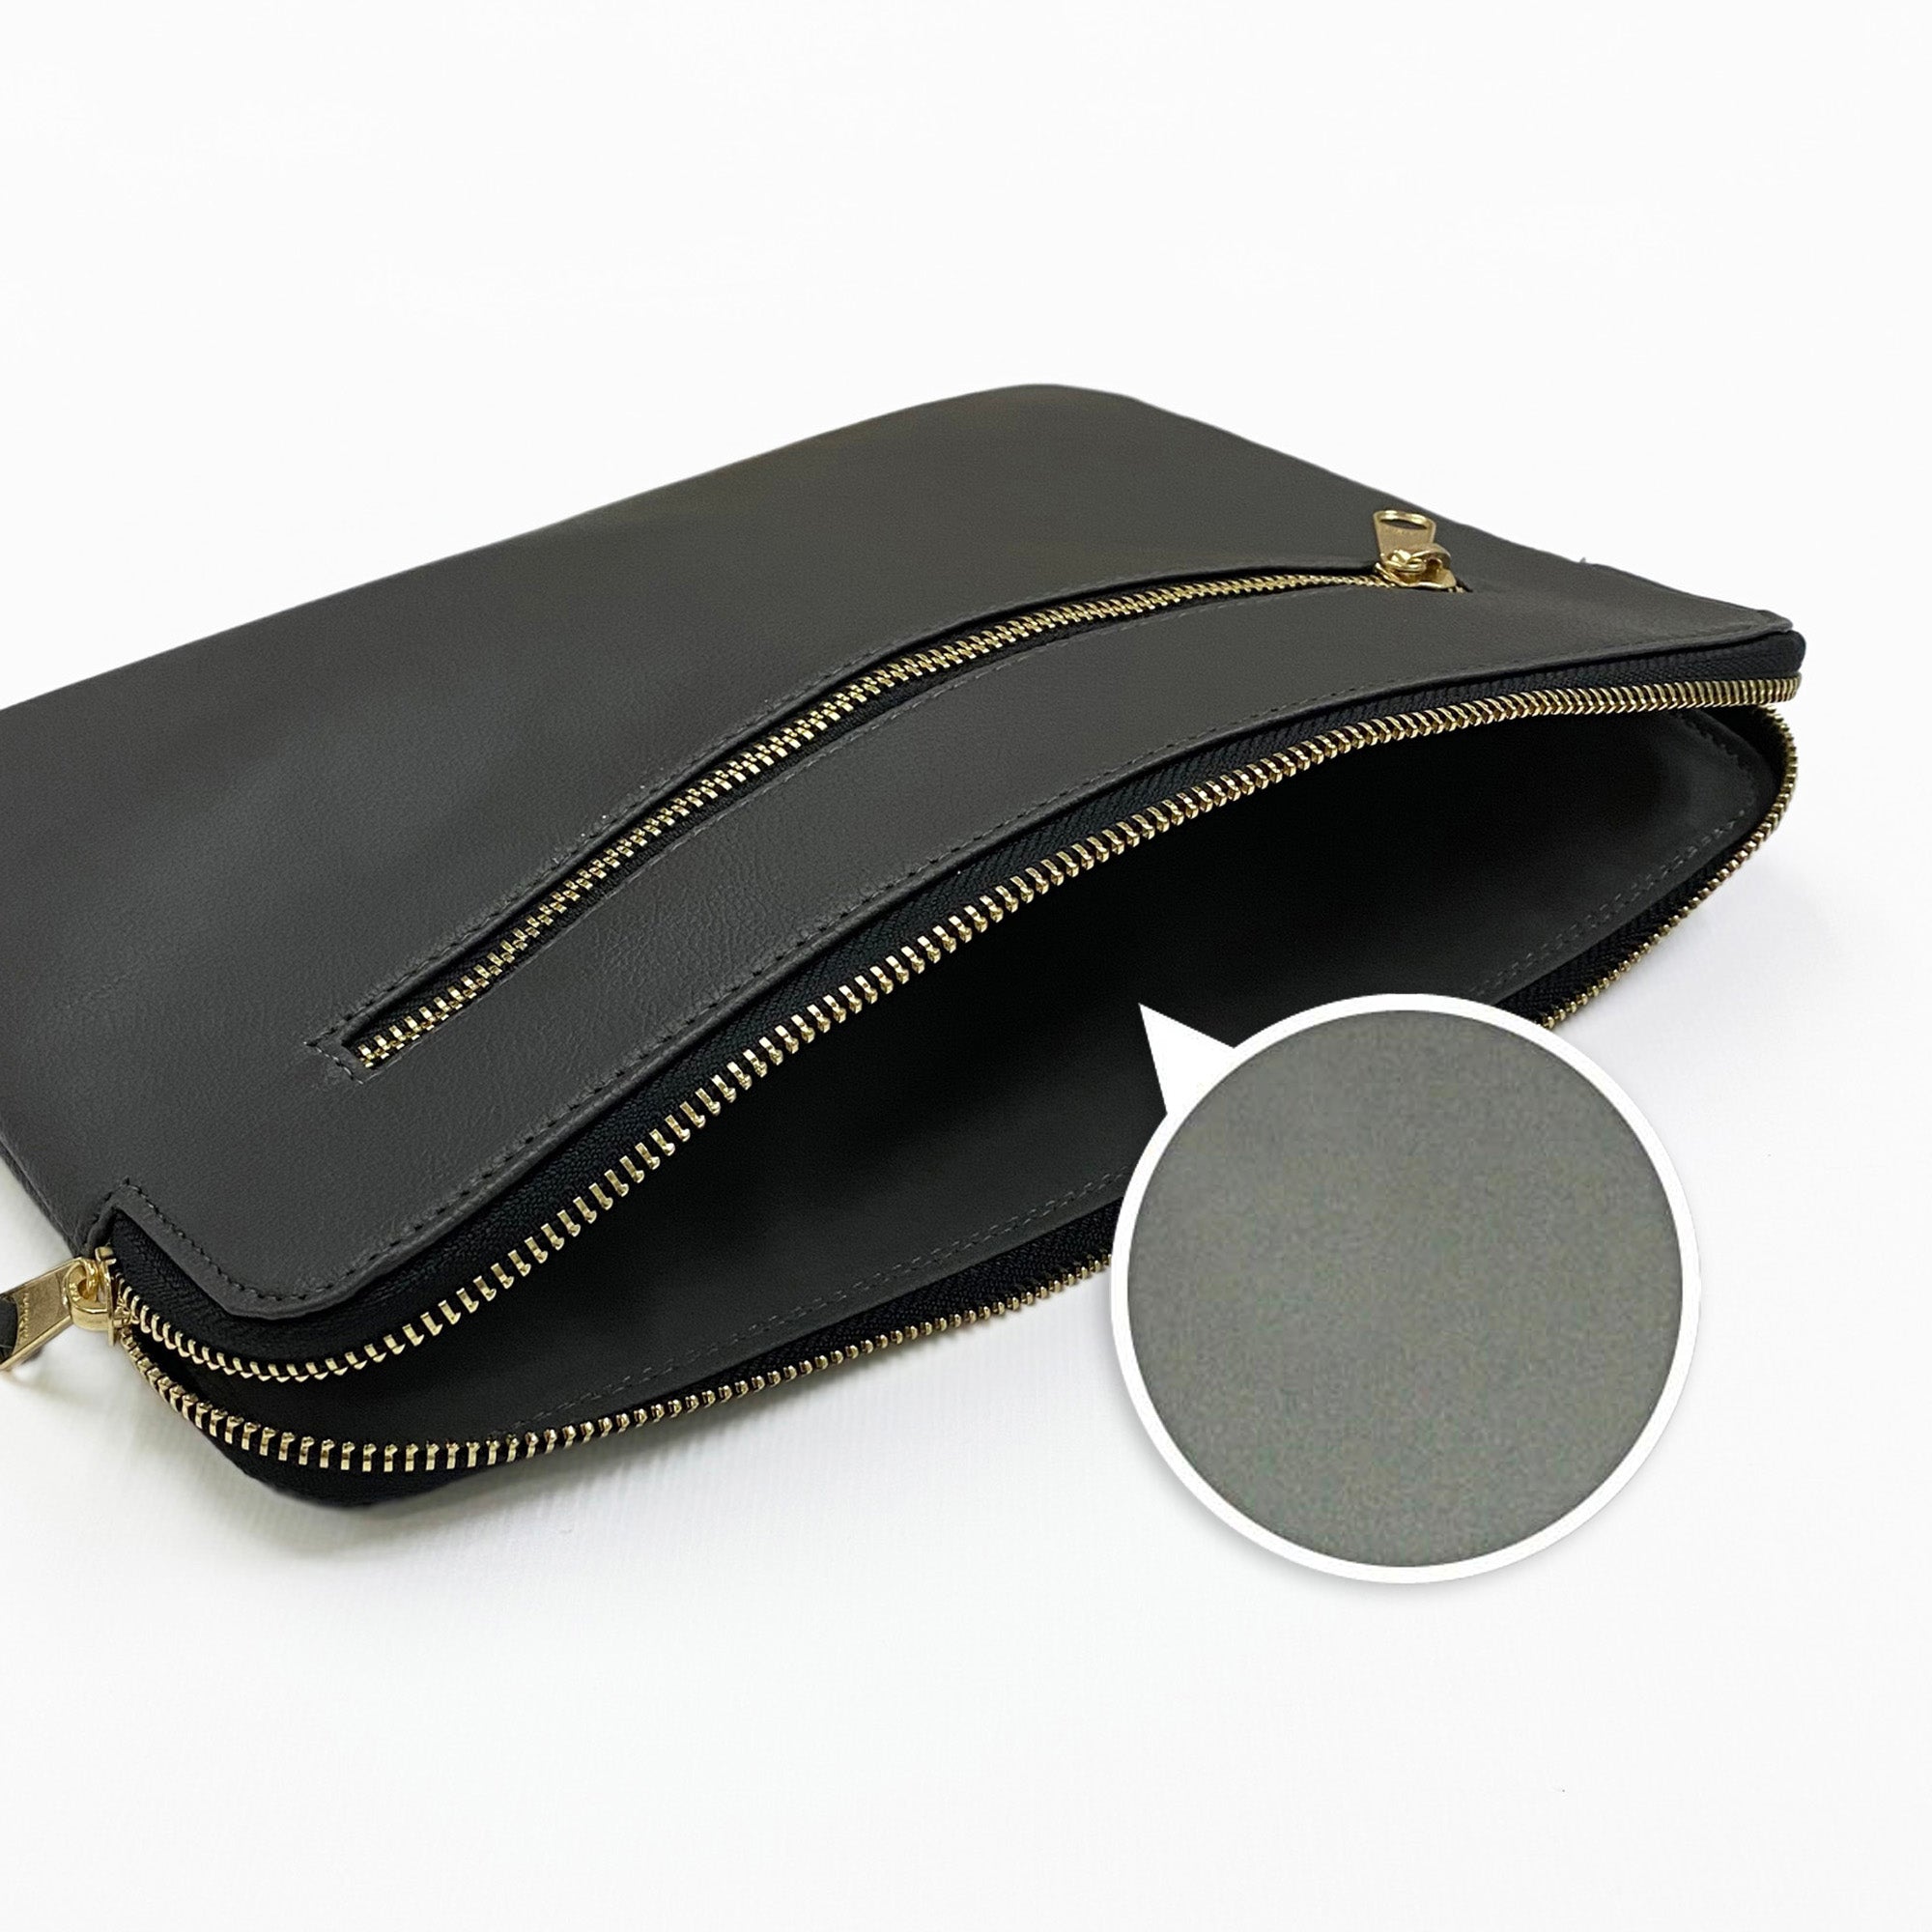 Black Tablet sleeve with YKK zipper closure and Suede inner